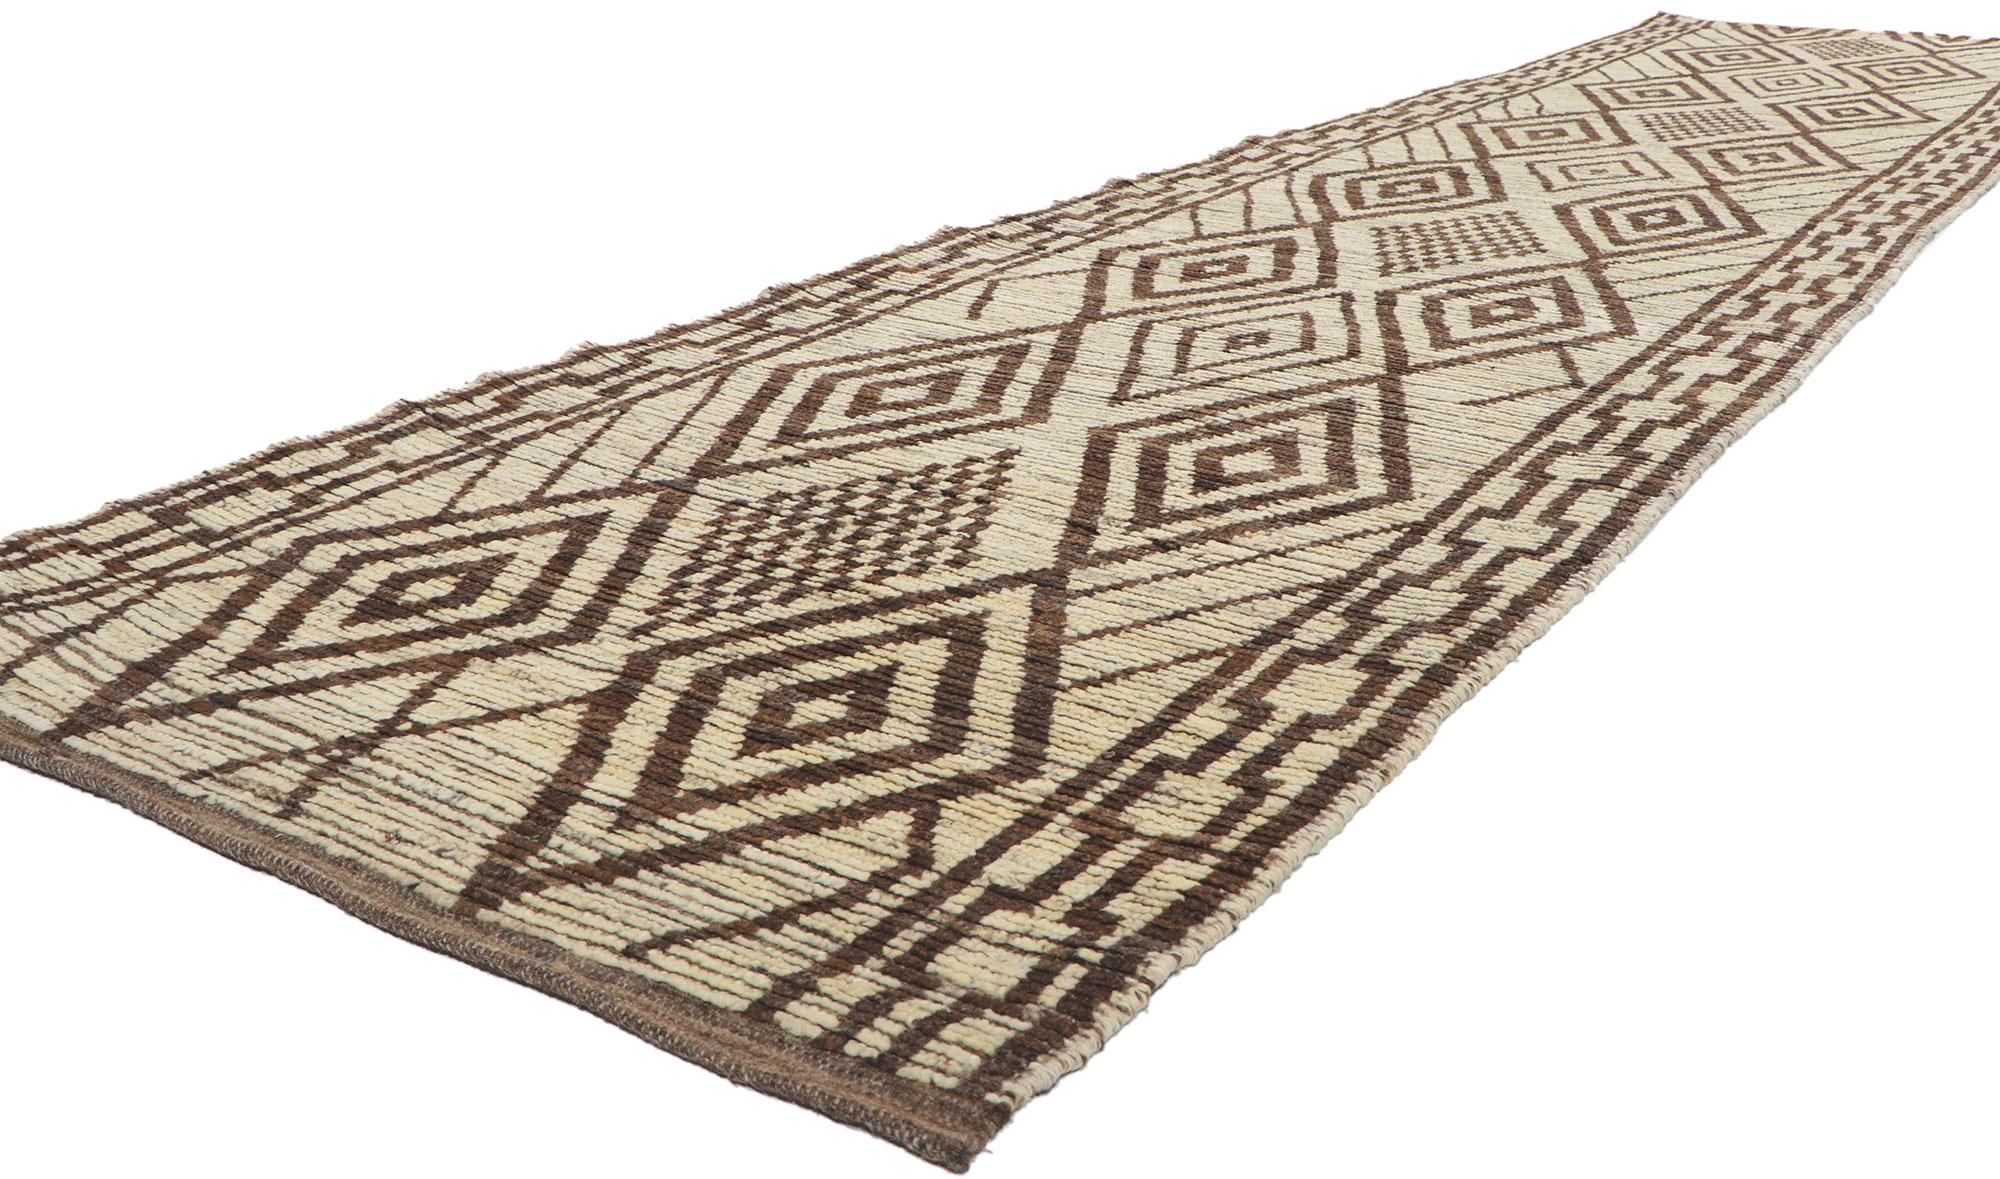 80778 New Contemporary Moroccan Runner with short pile, 03'07 x 15'10. With its nomadic charm, incredible detail and texture, this hand knotted wool contemporary Moroccan runner is a captivating vision of woven beauty. The tribal pattern and earthy